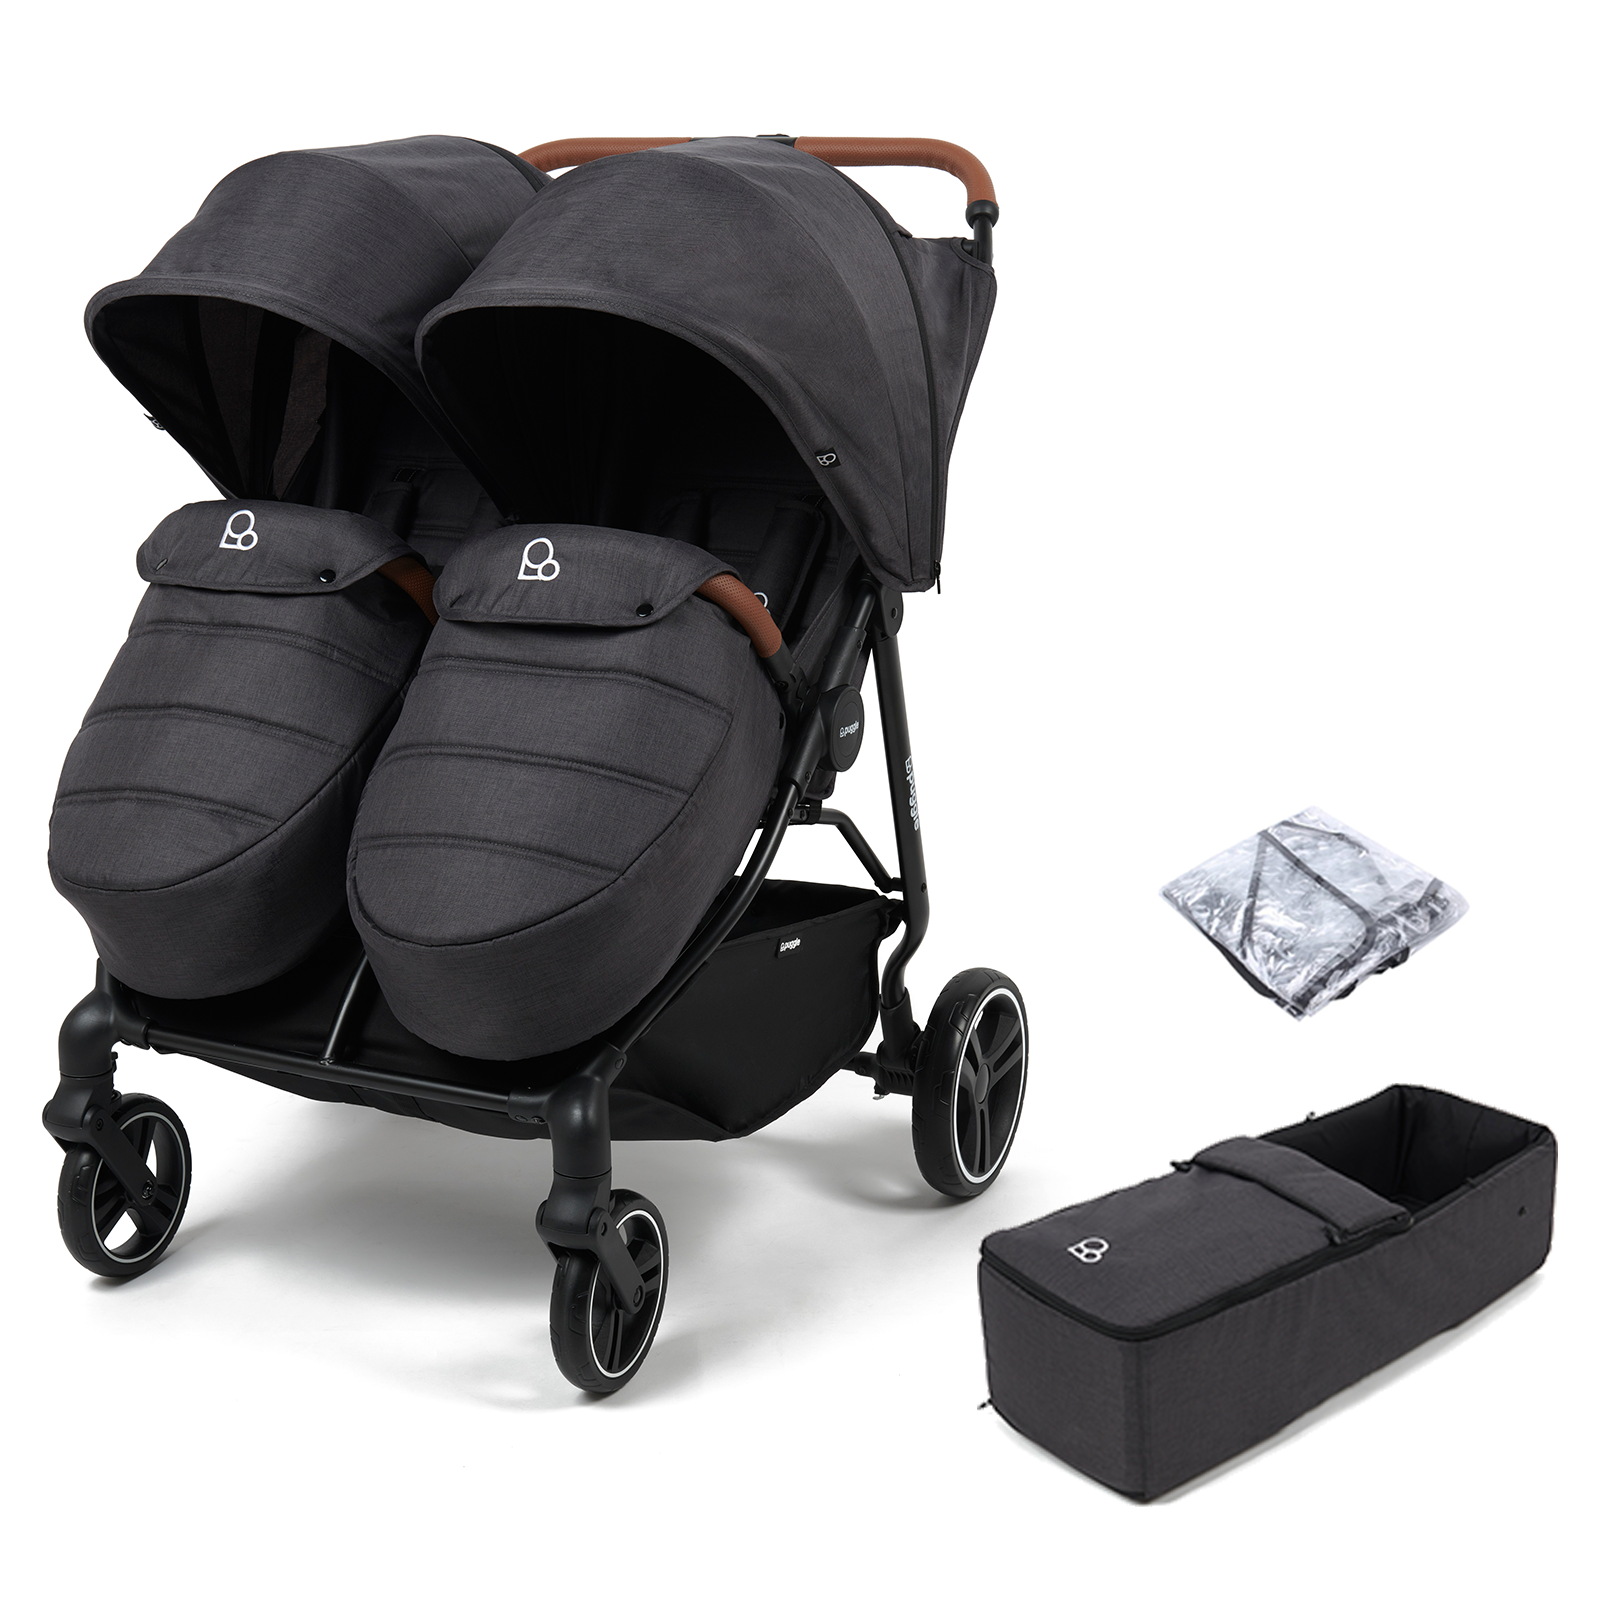 Puggle Urban City Easyfold Twin Double Pushchair + 1 Soft Carrycot - Slate Grey